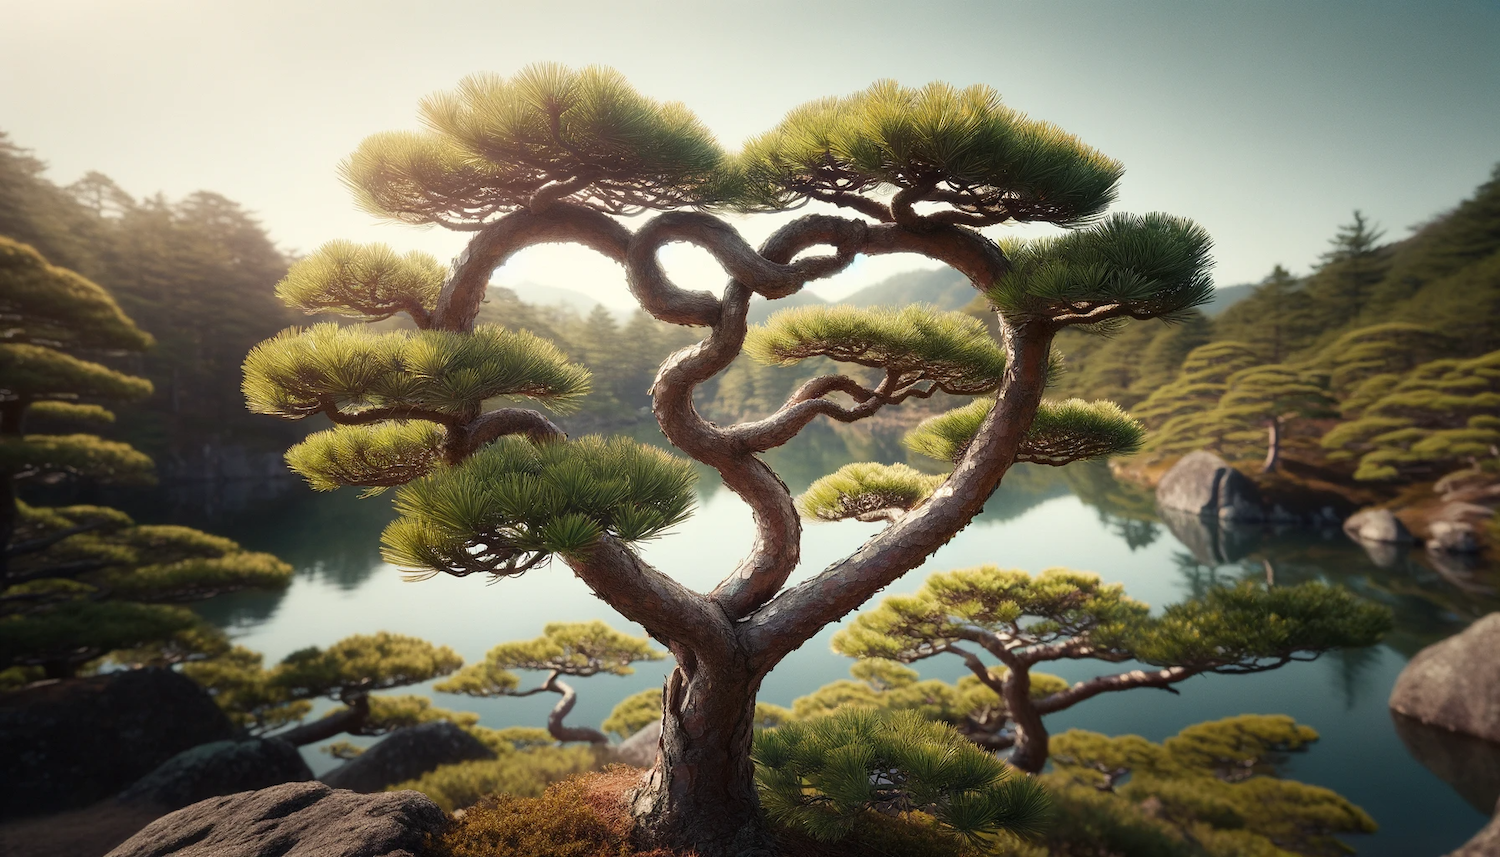 showcasing a close-up of a pine tree with branches that intertwine to form a subtle heart shape, set against a blurry background with a serene lake, all under great weather conditions. The photo captures the essence of tranquility and the subtle presence of love in nature in this wider perspective.